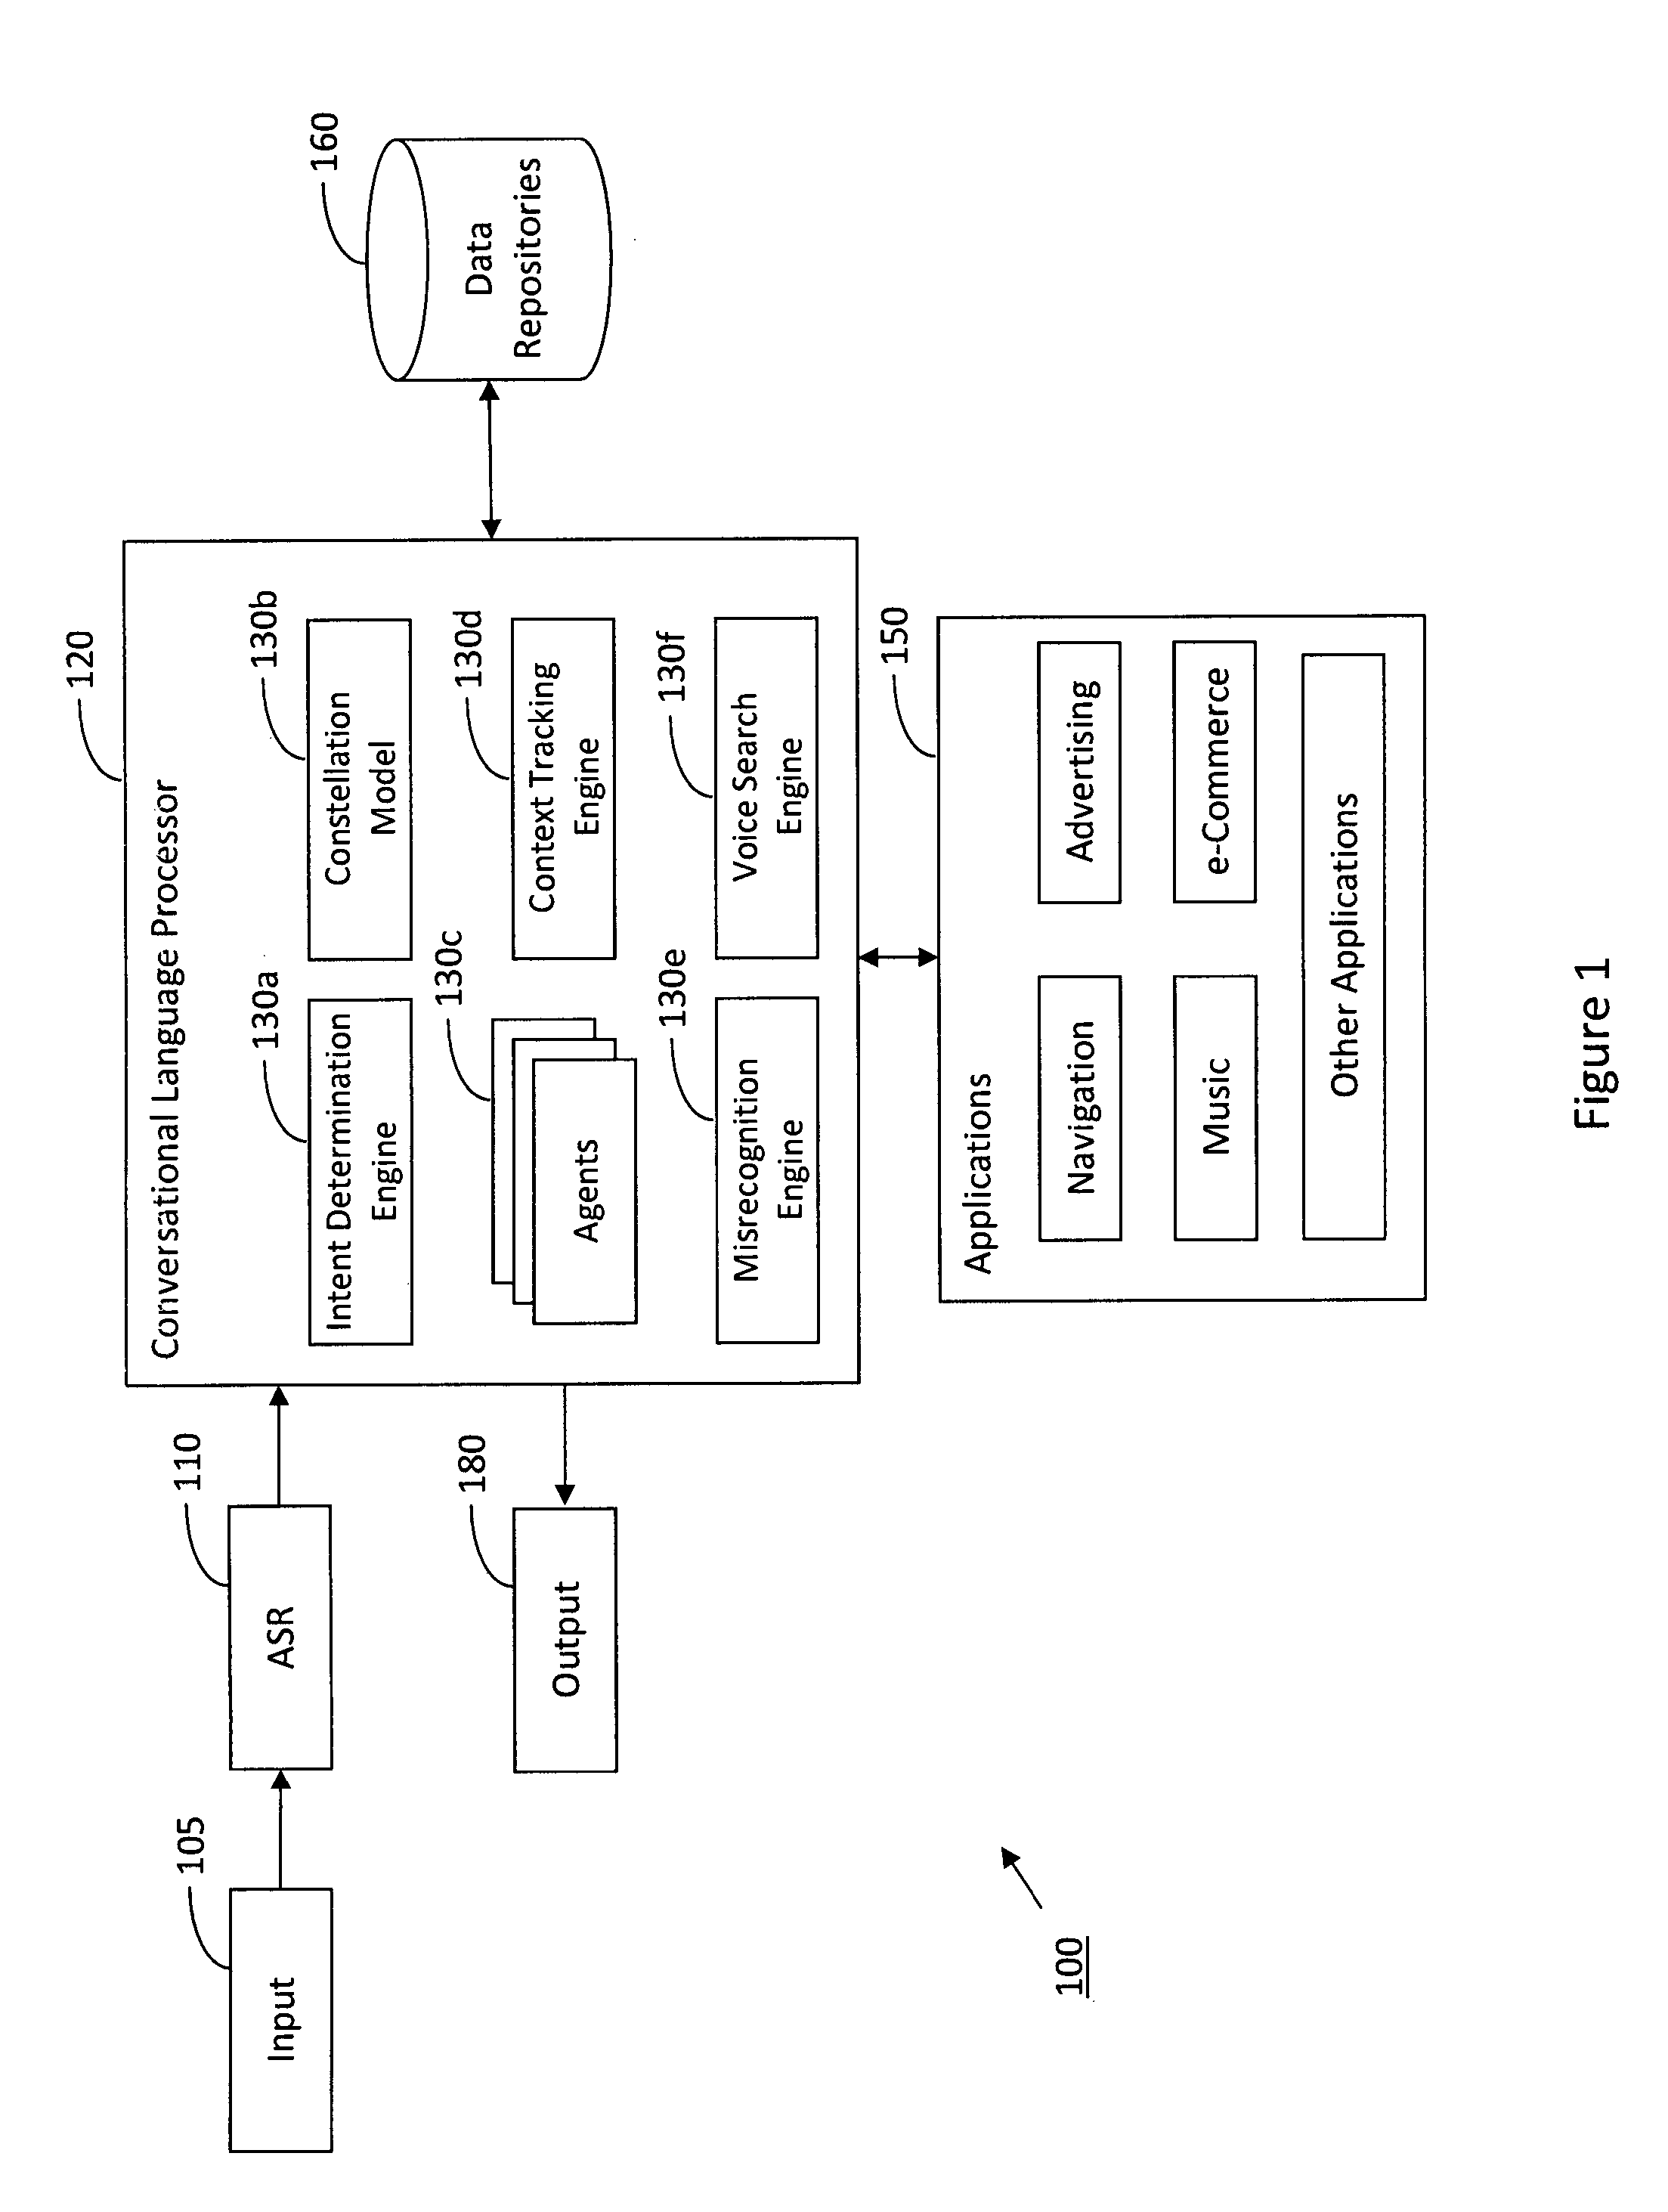 System and method for an integrated, multi-modal, multi-device natural language voice services environment